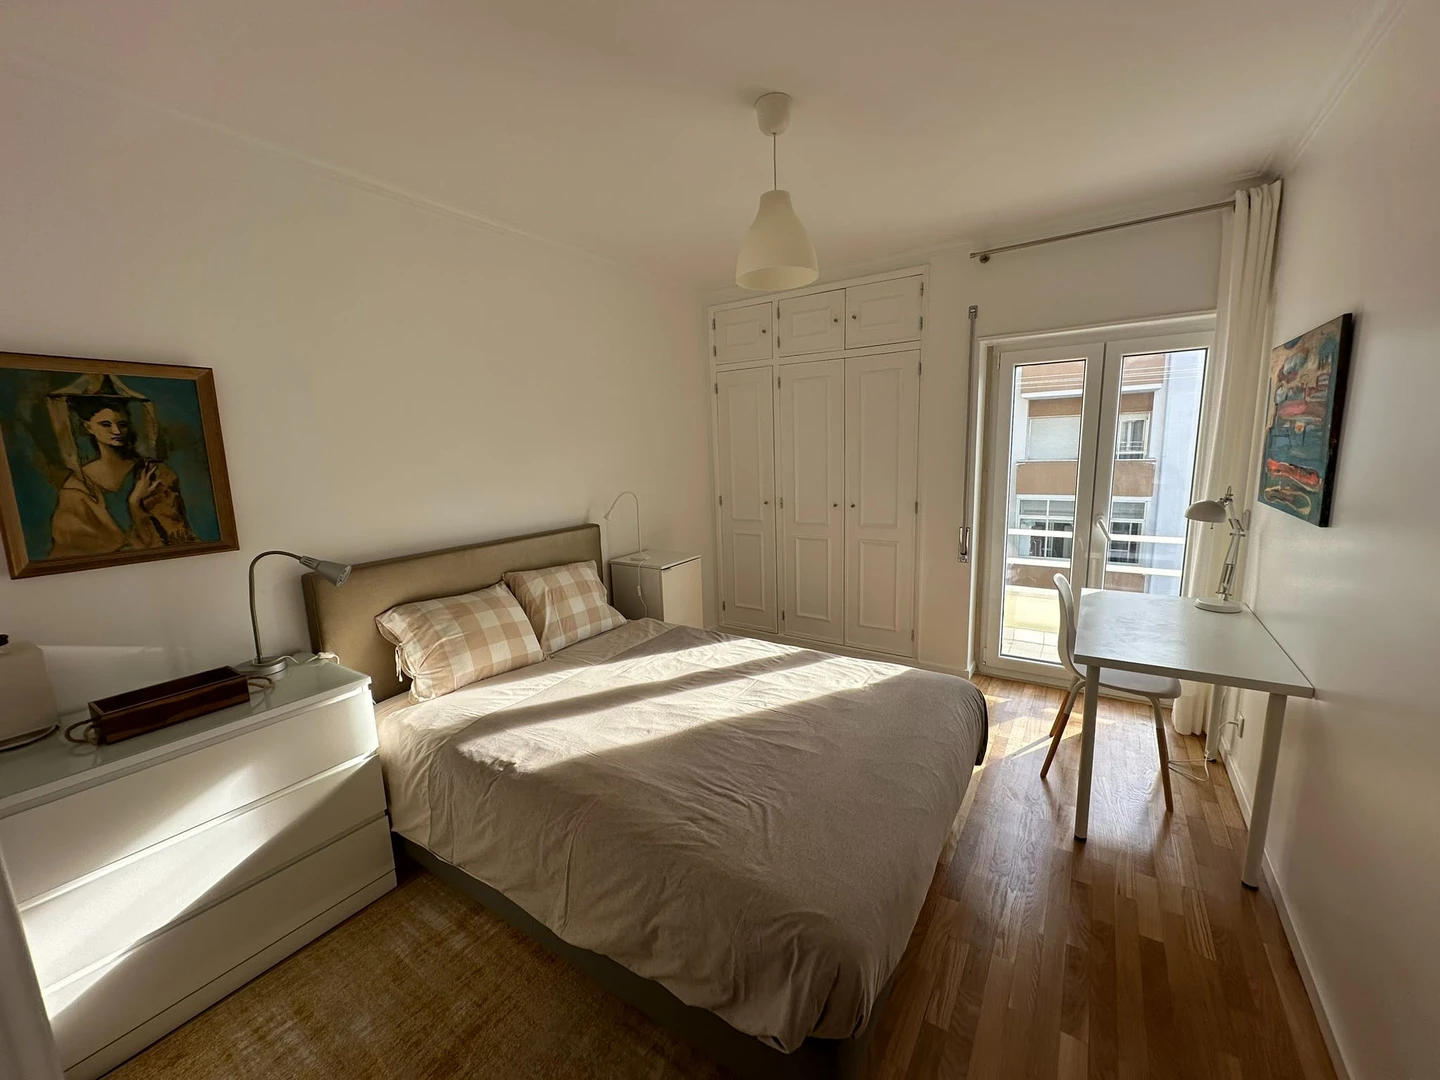 Renting rooms by the month in Estoril